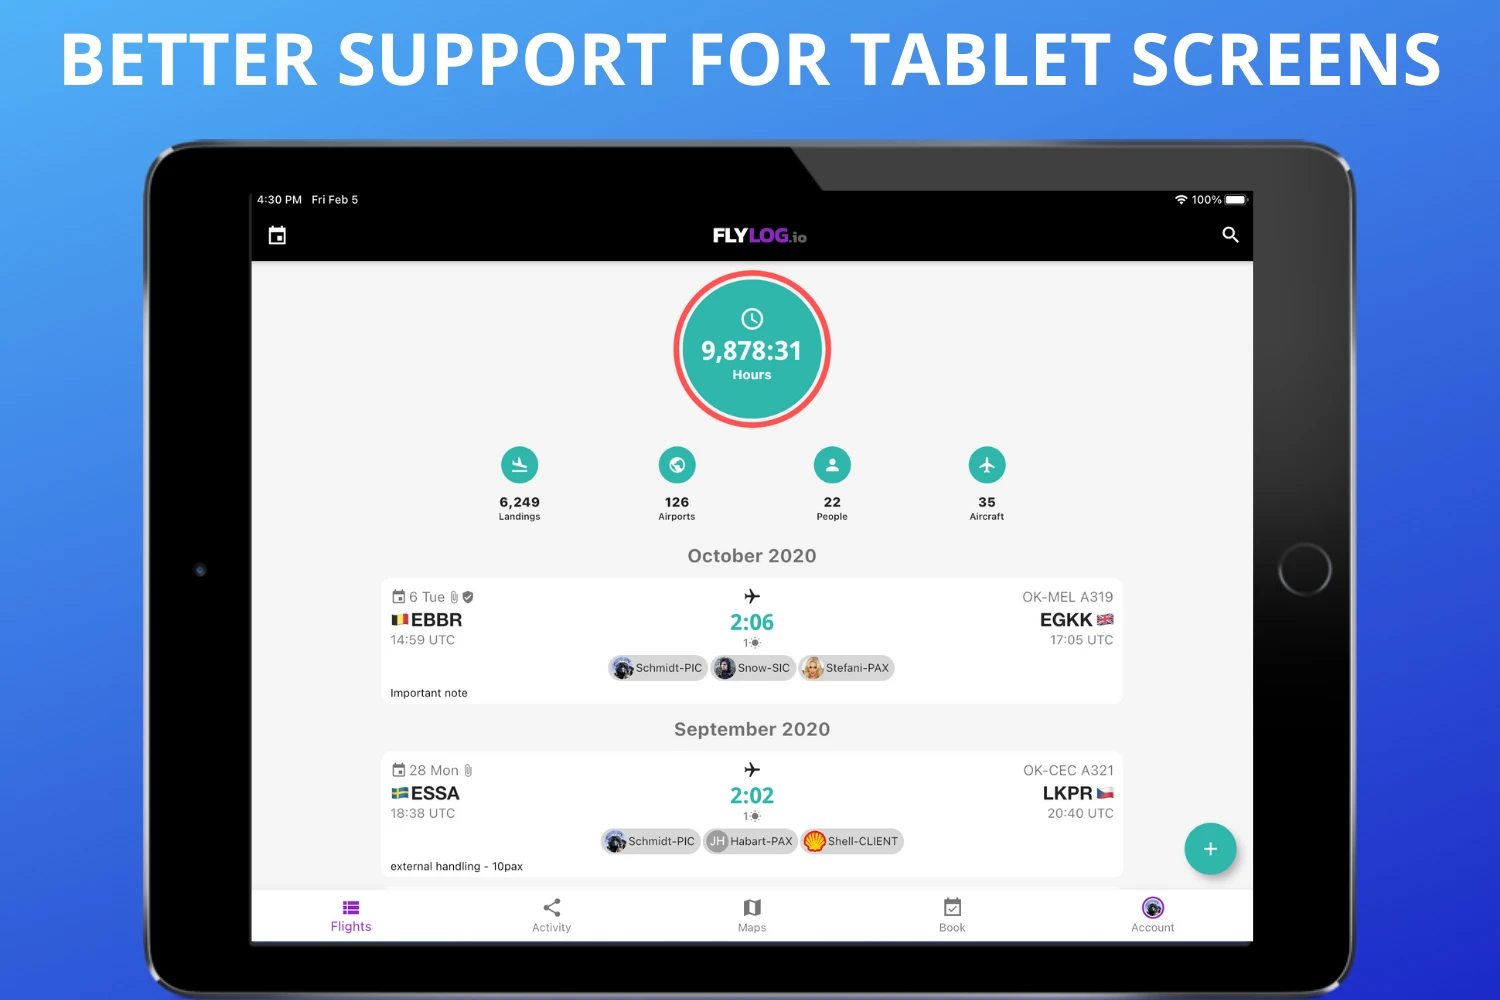 Better support for tablet screens